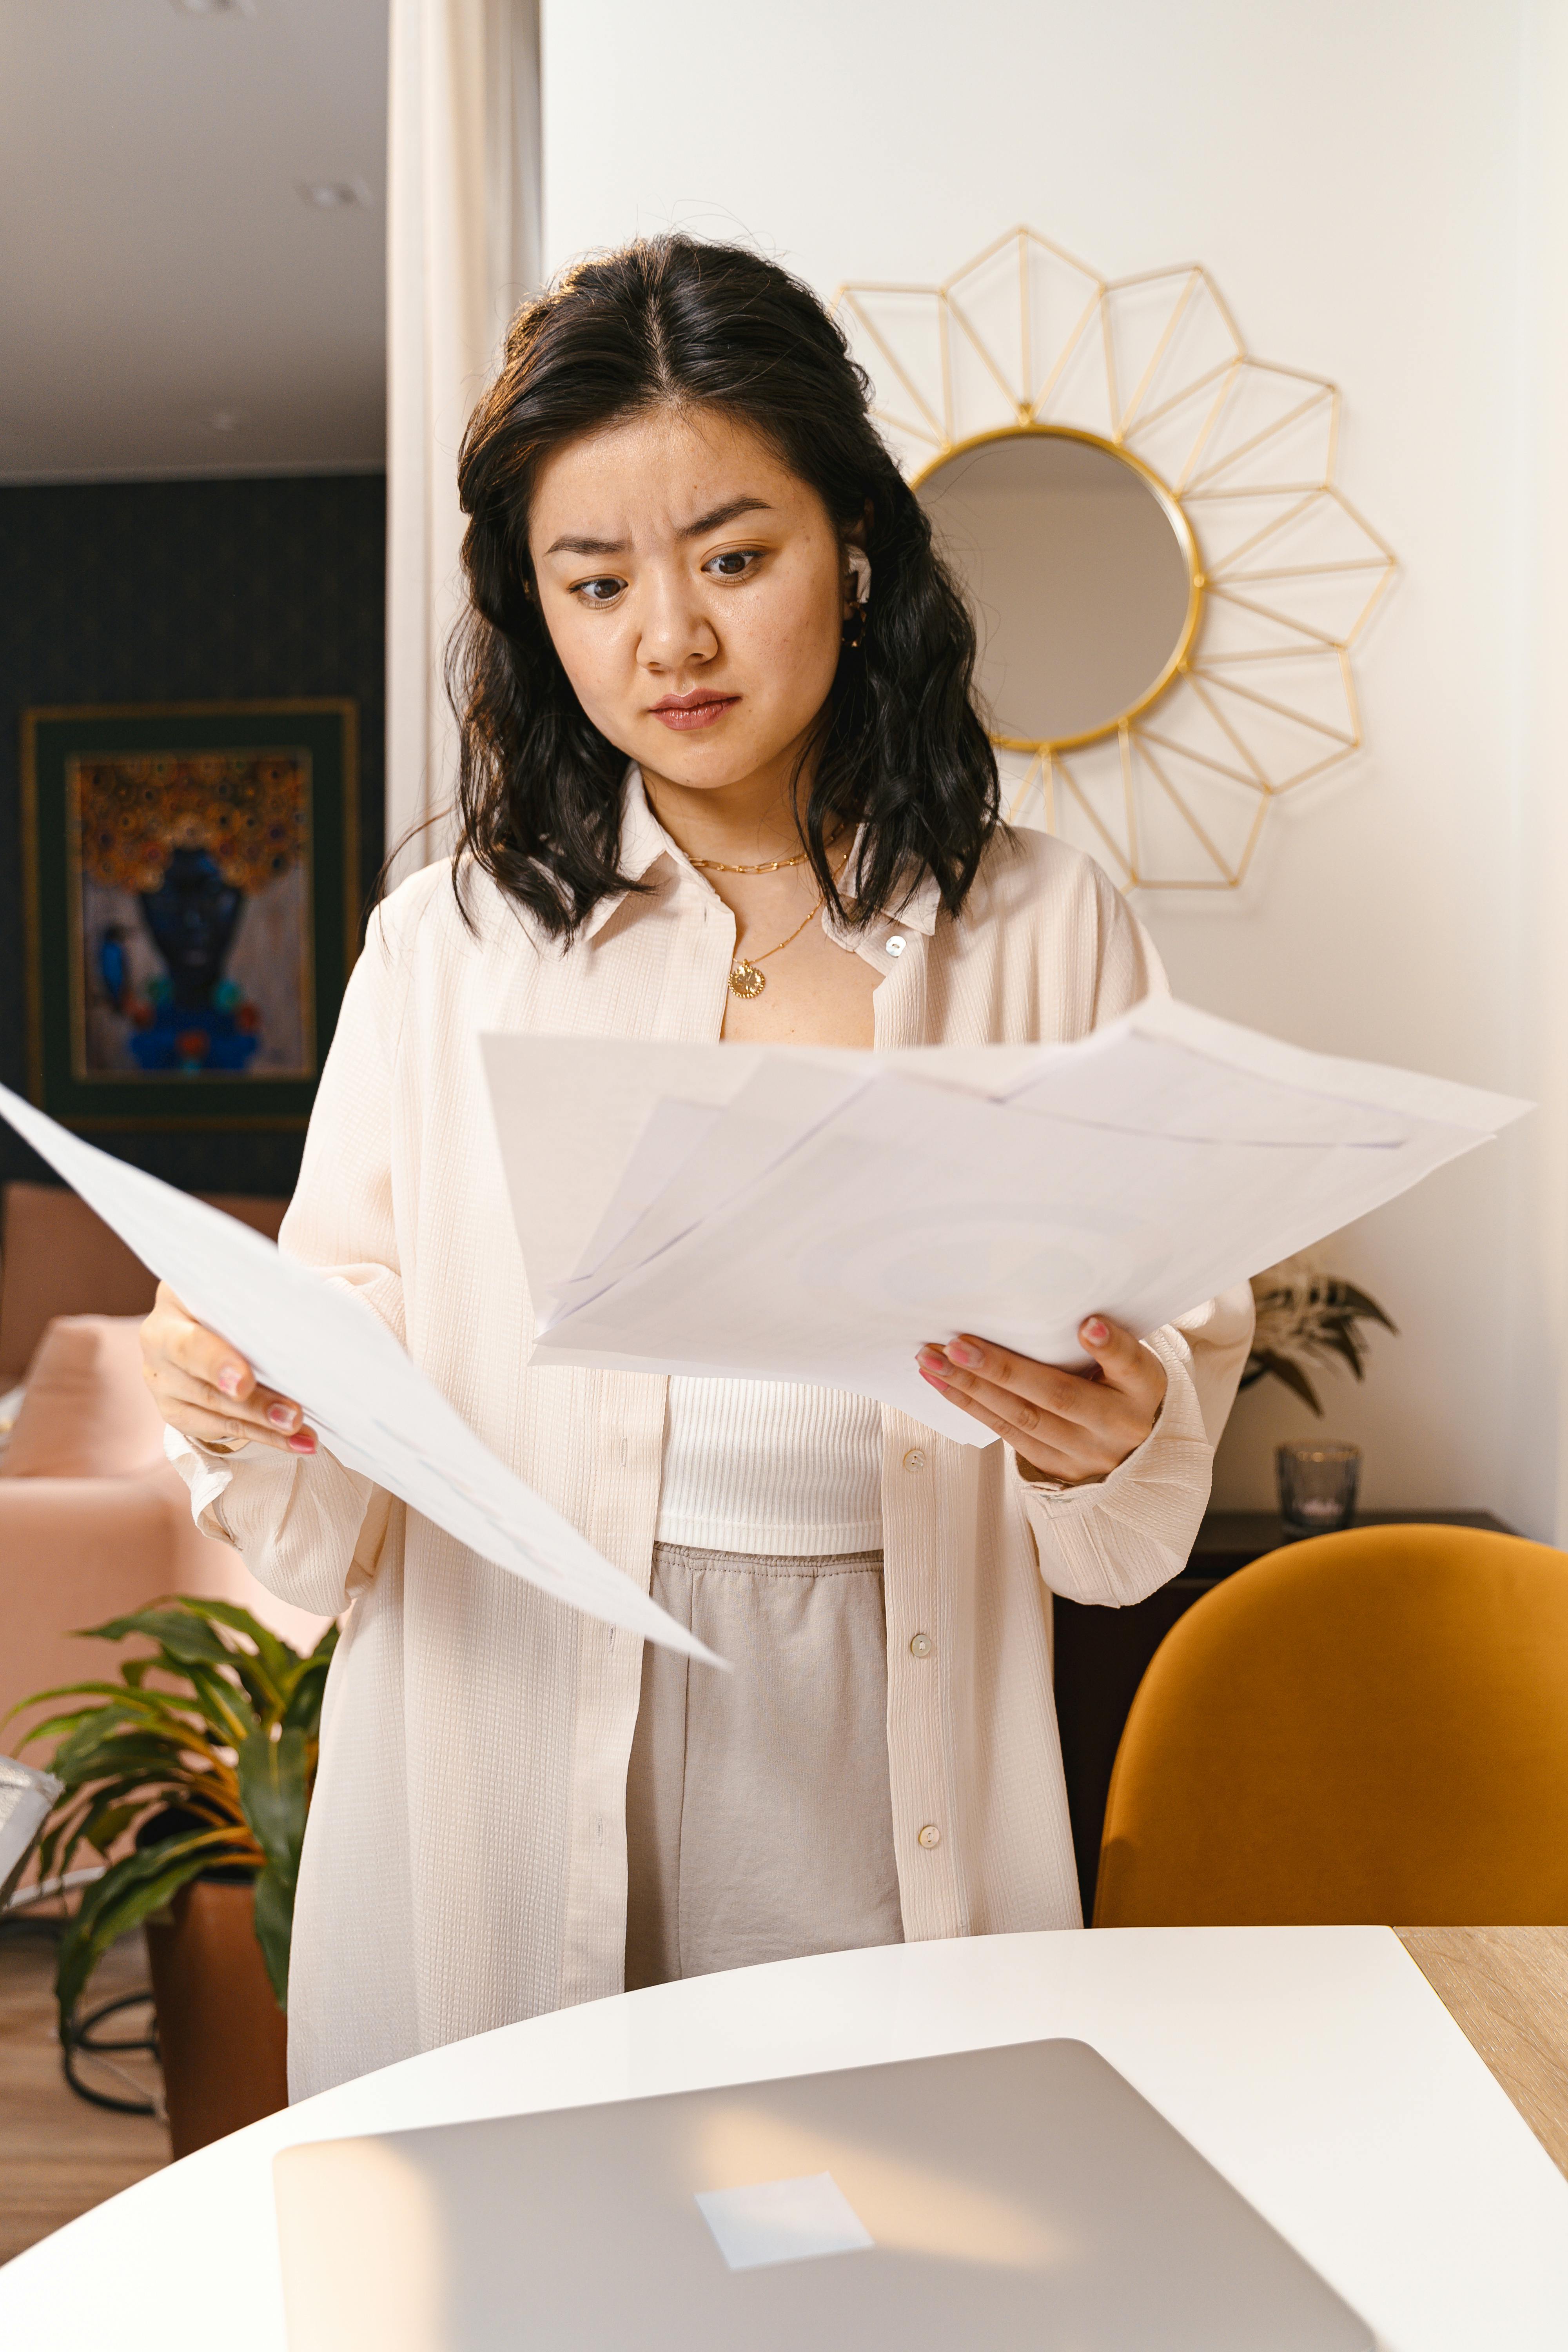 A woman looking at paperwork while contemplating her next move | Source: Pexels